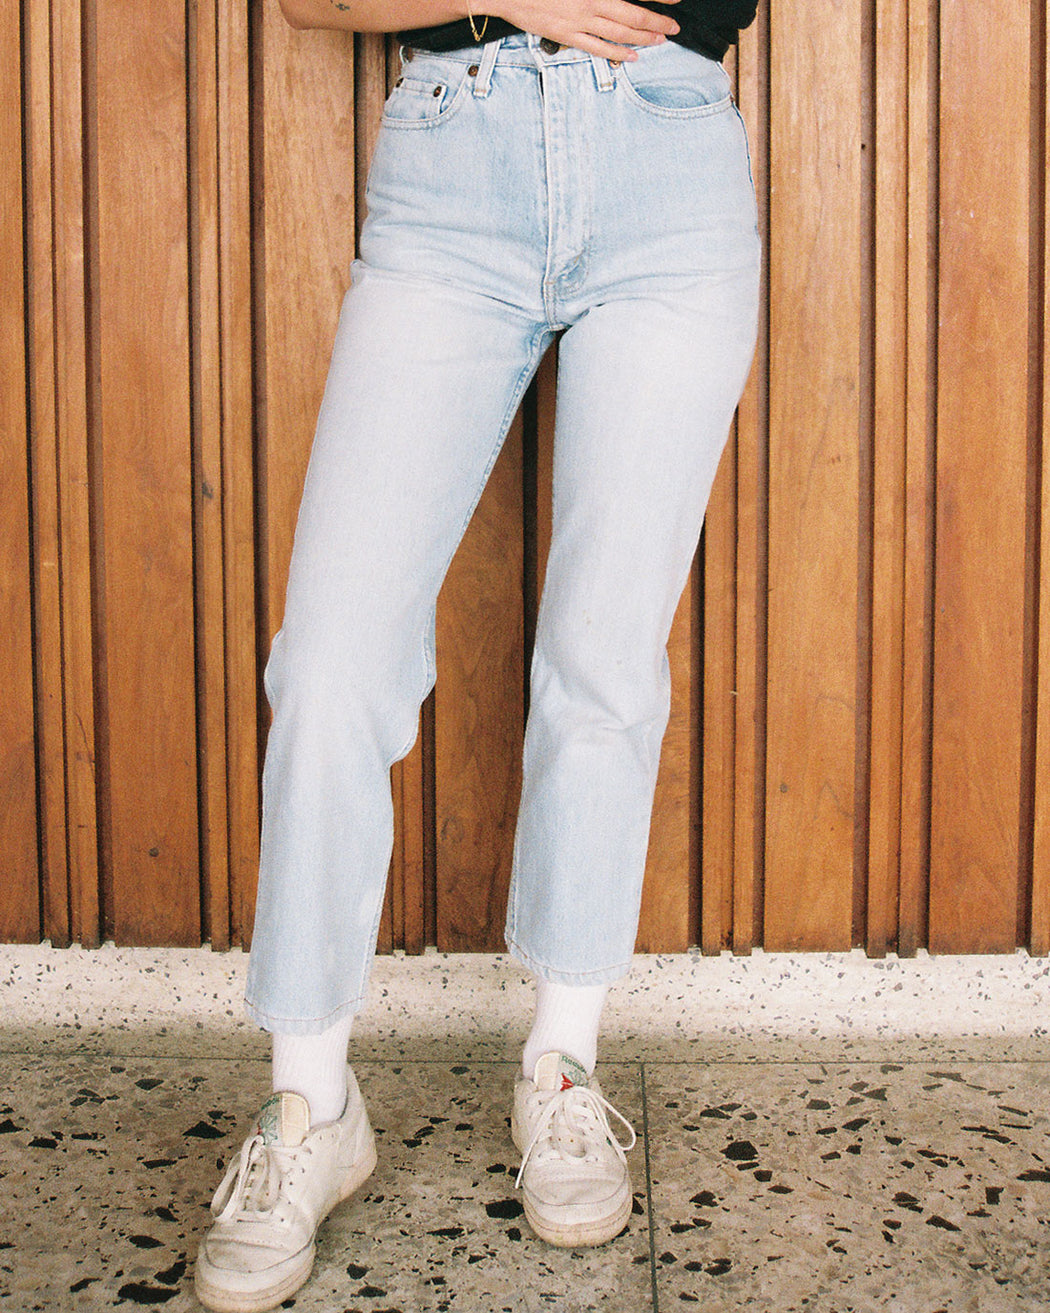 classic high waisted levi jeans